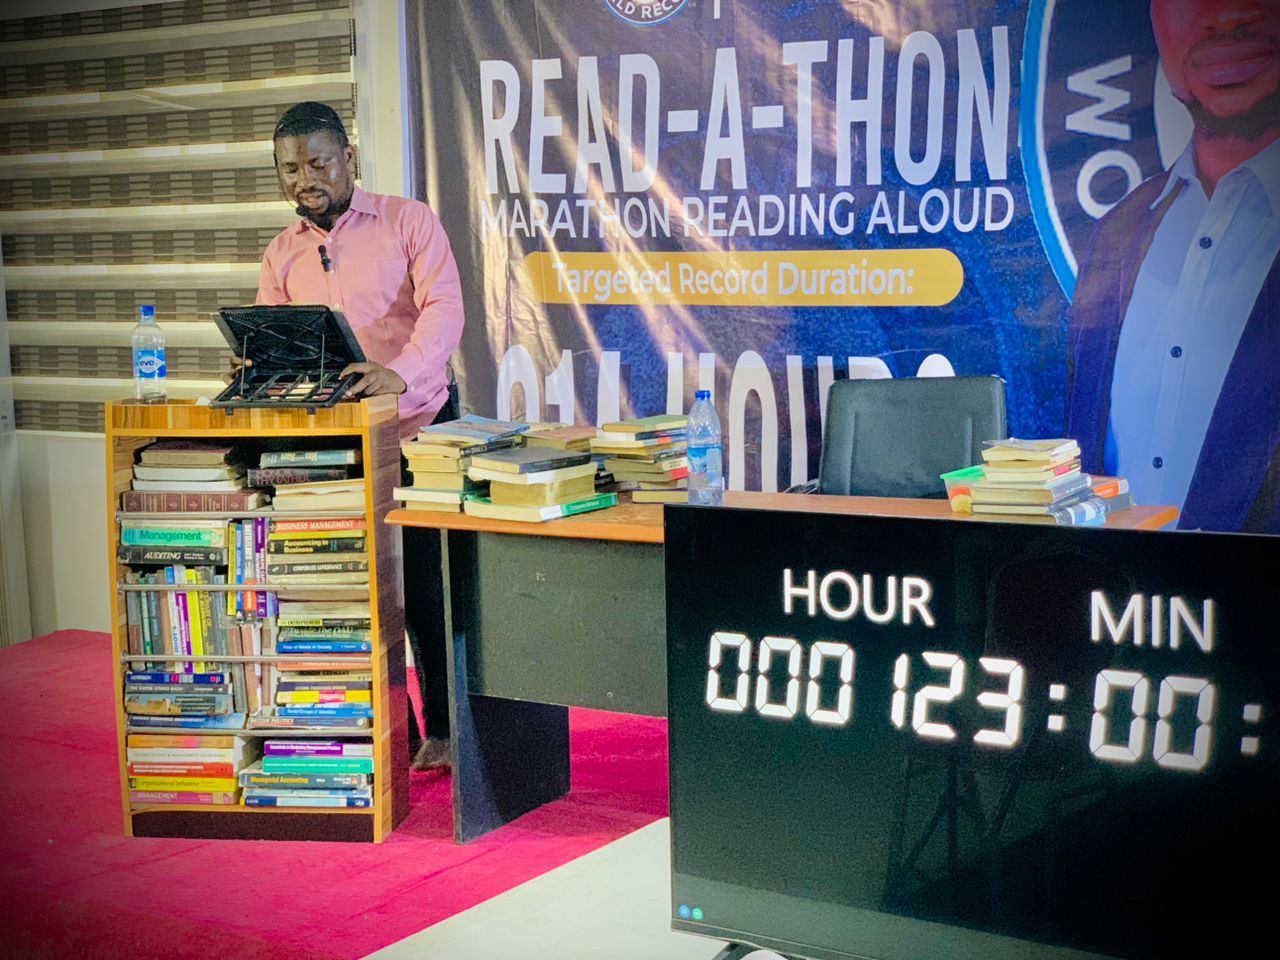 GWR Read-A-Thon: All Eyes On Ajao As He Nears Replacing Current Title Holder